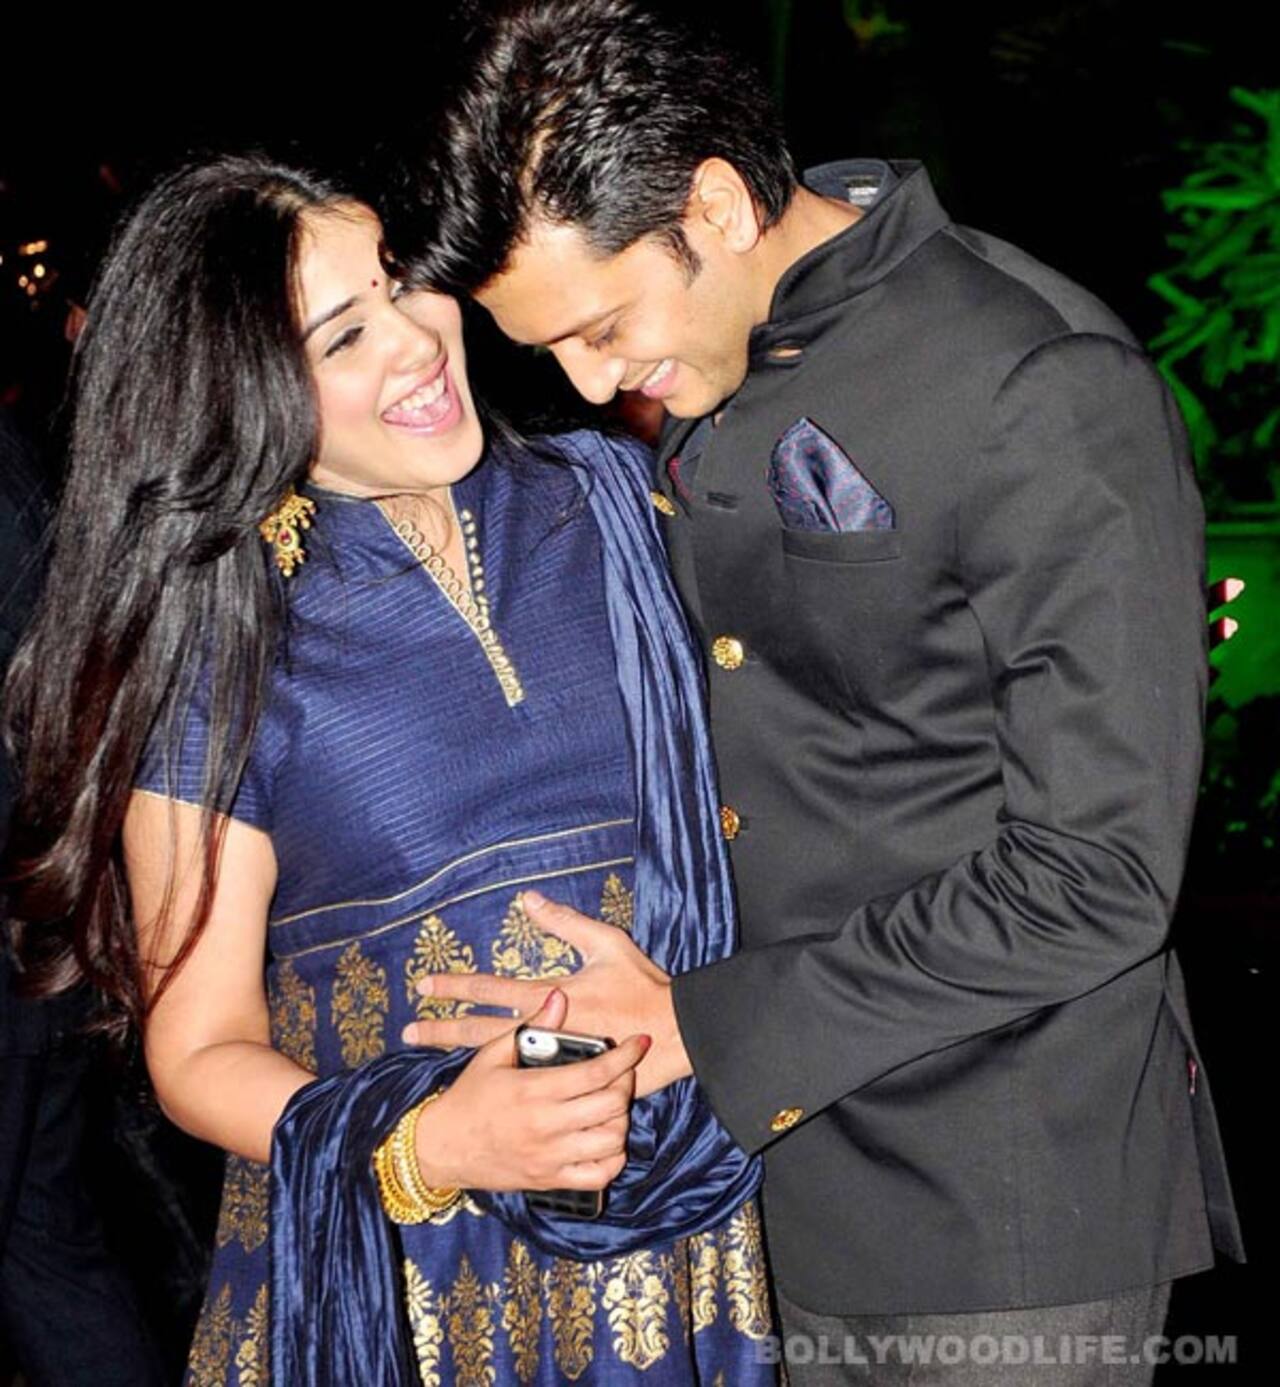 Sweethearts Genelia D'Souza and Riteish Deshmukh's this interview will make you fall in LOVE with them!